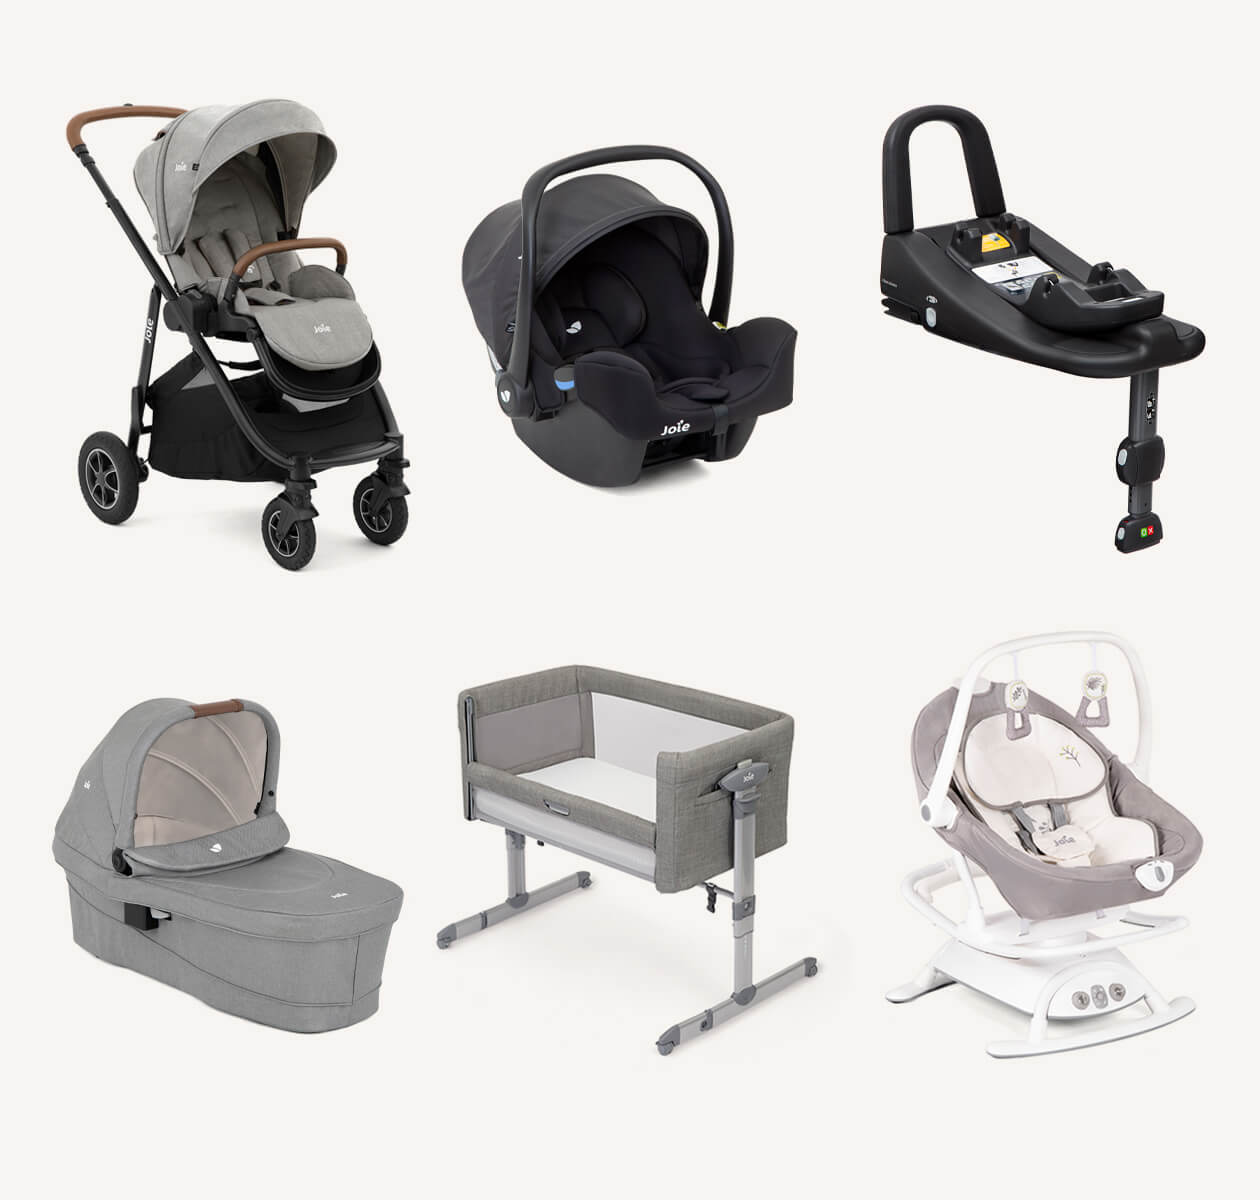 Collage showing all 6 products in the Joie Newborn Essentials bundle. Top row left to right: Versatrax pram, I-Snug 2 infant car seat, I-Base Advance car seat base. Bottom row left to right: Ramble XL carry cot, Roomie Glide bedside crib, Sansa 2in1 glide